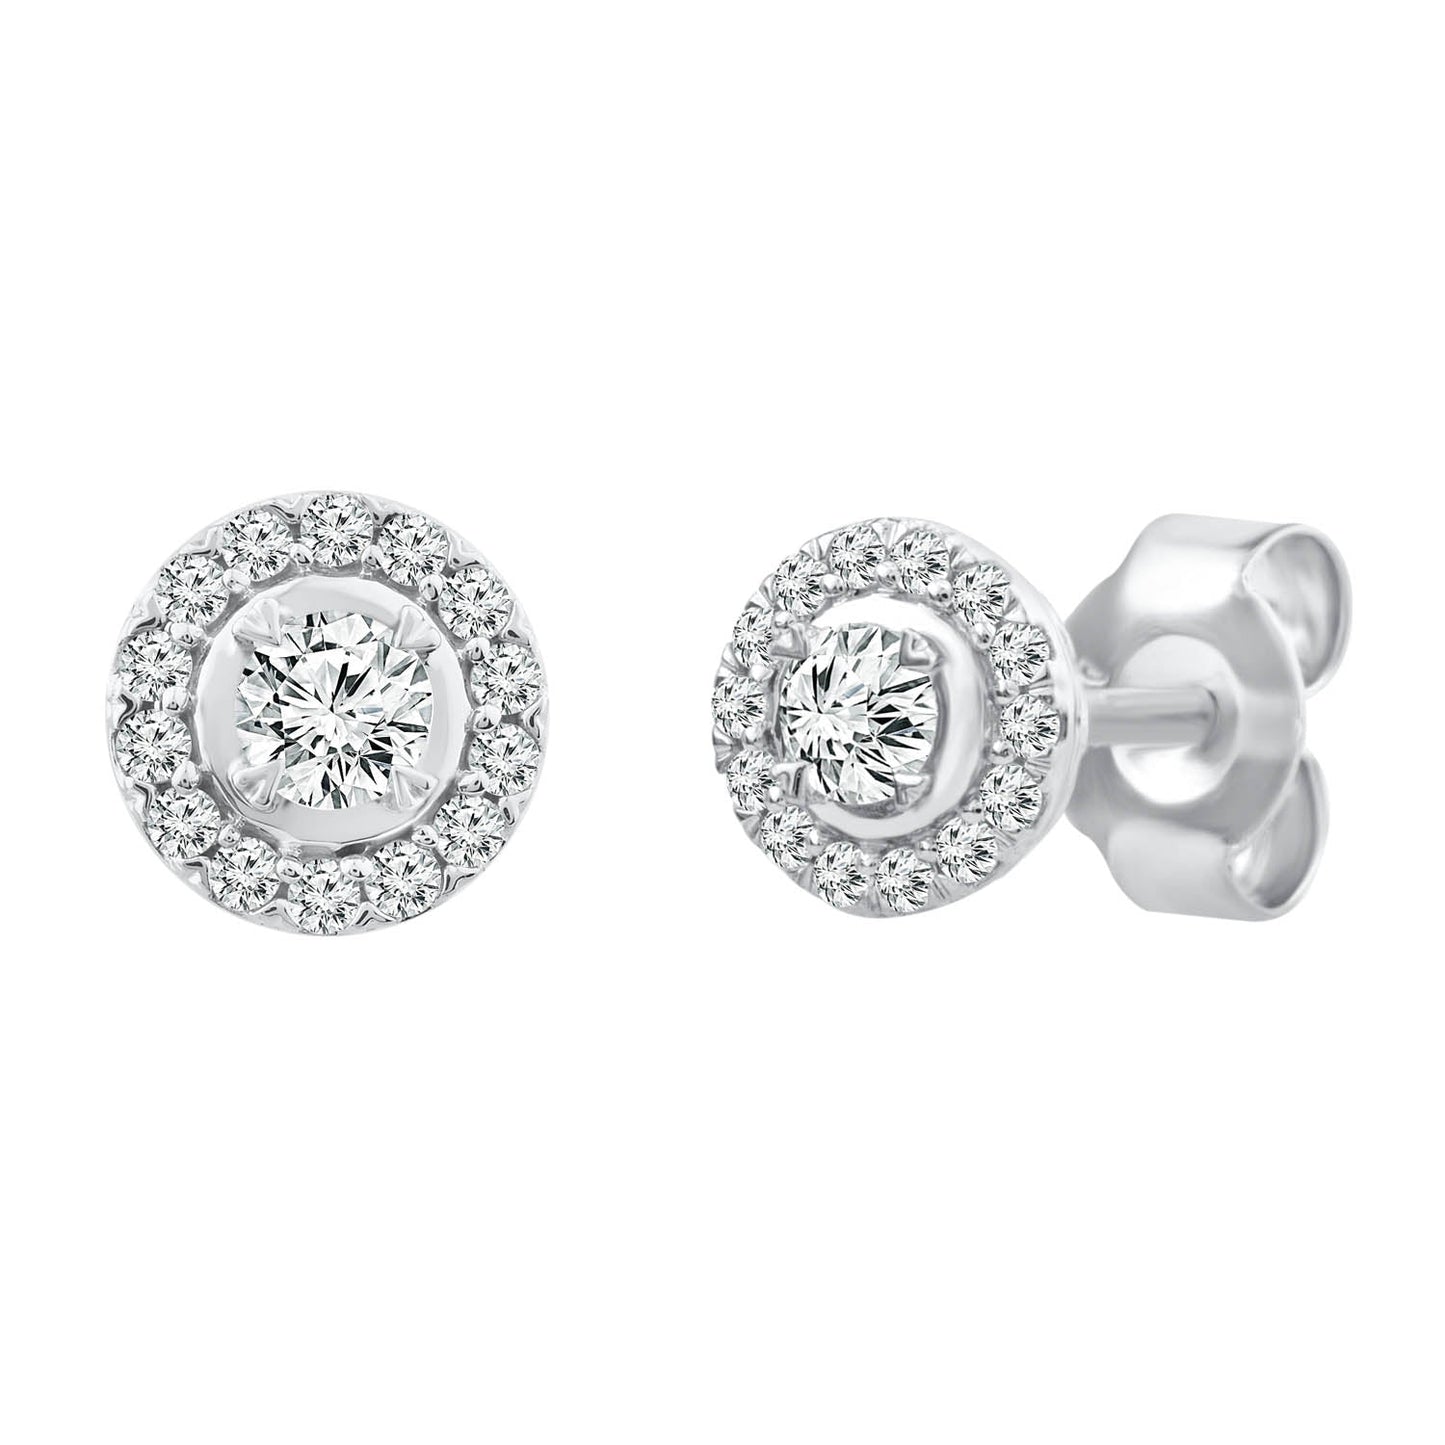 Halo Stud Earrings with 0.25ct Diamonds in 9K White Gold - EF-5120-W